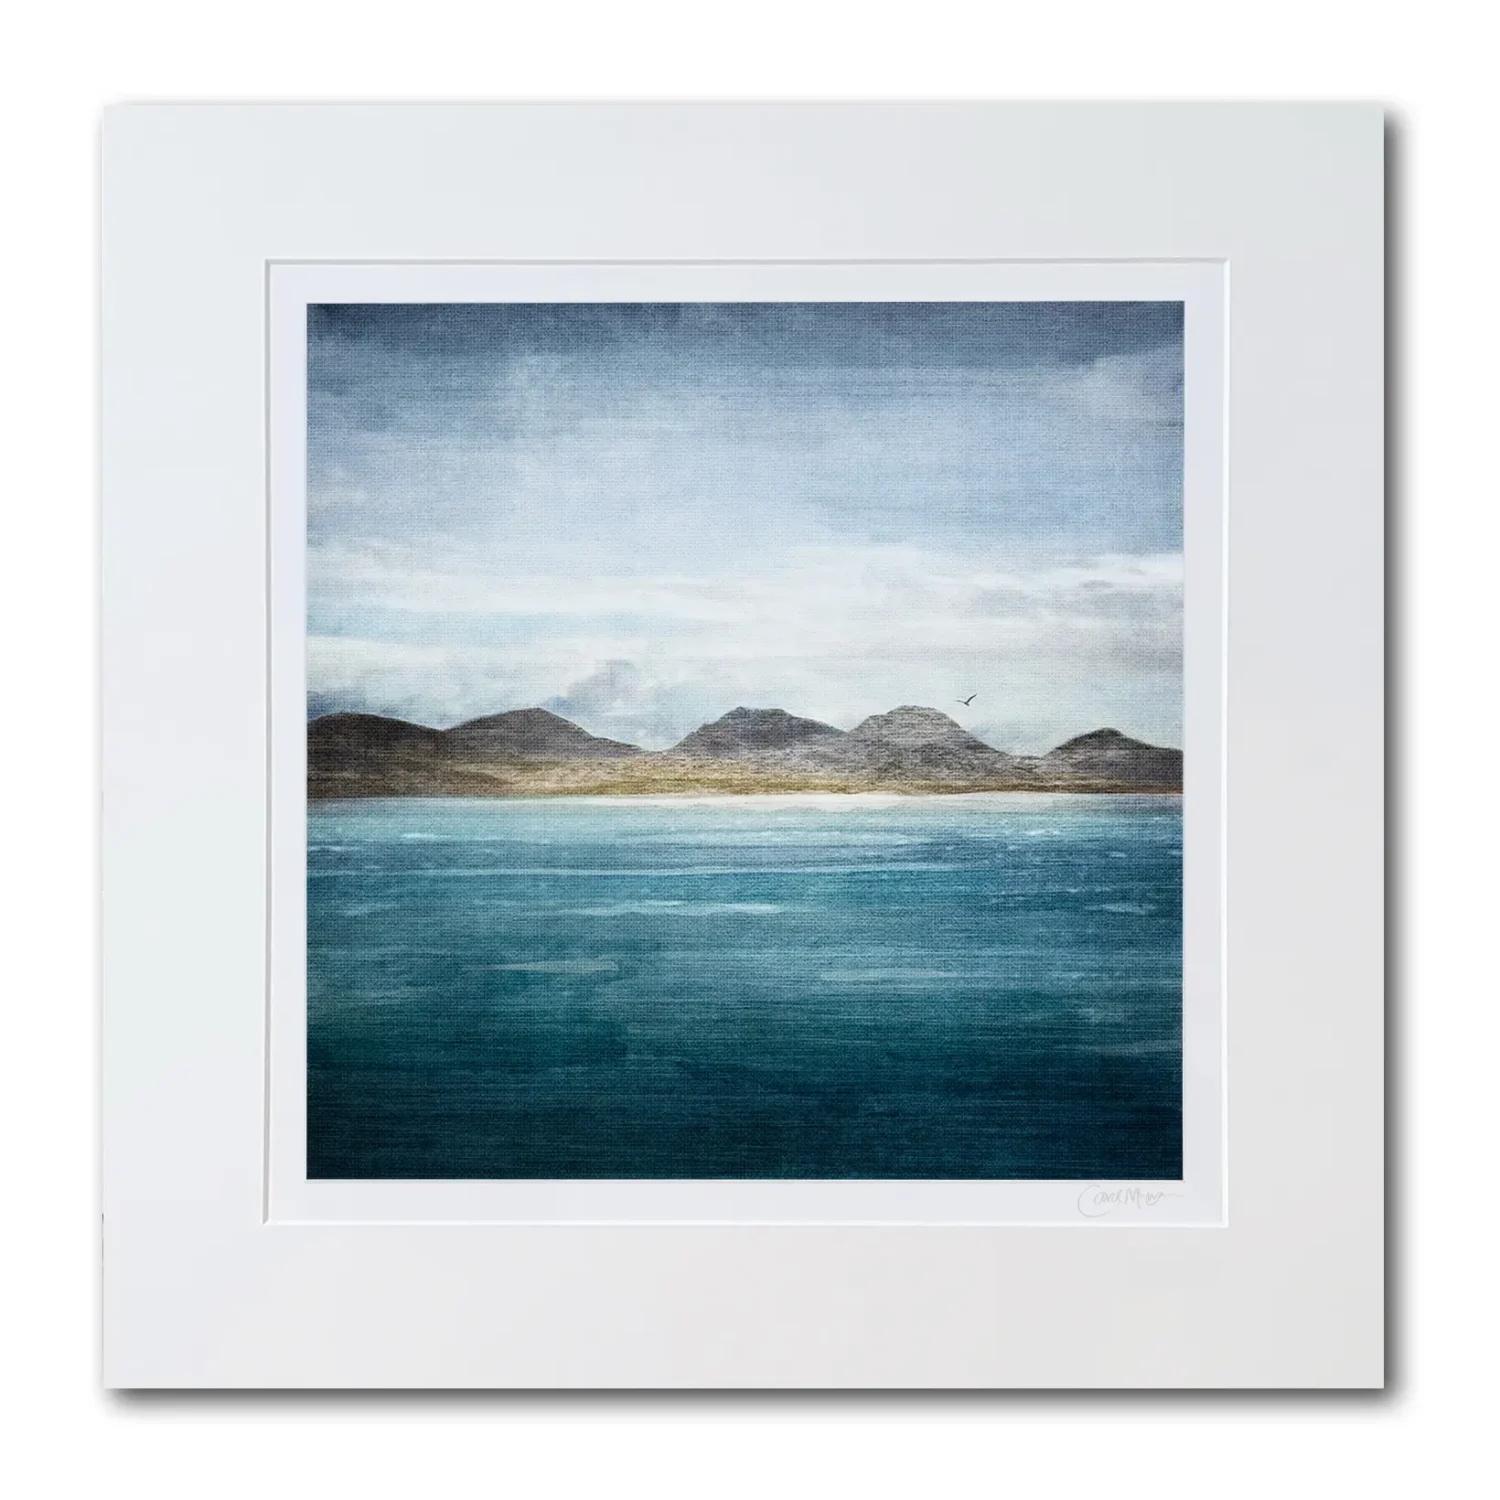 Isle of Jura print mounted. The image has a seascape with deep blue water and hills in the distance which are from the Isle of Jura